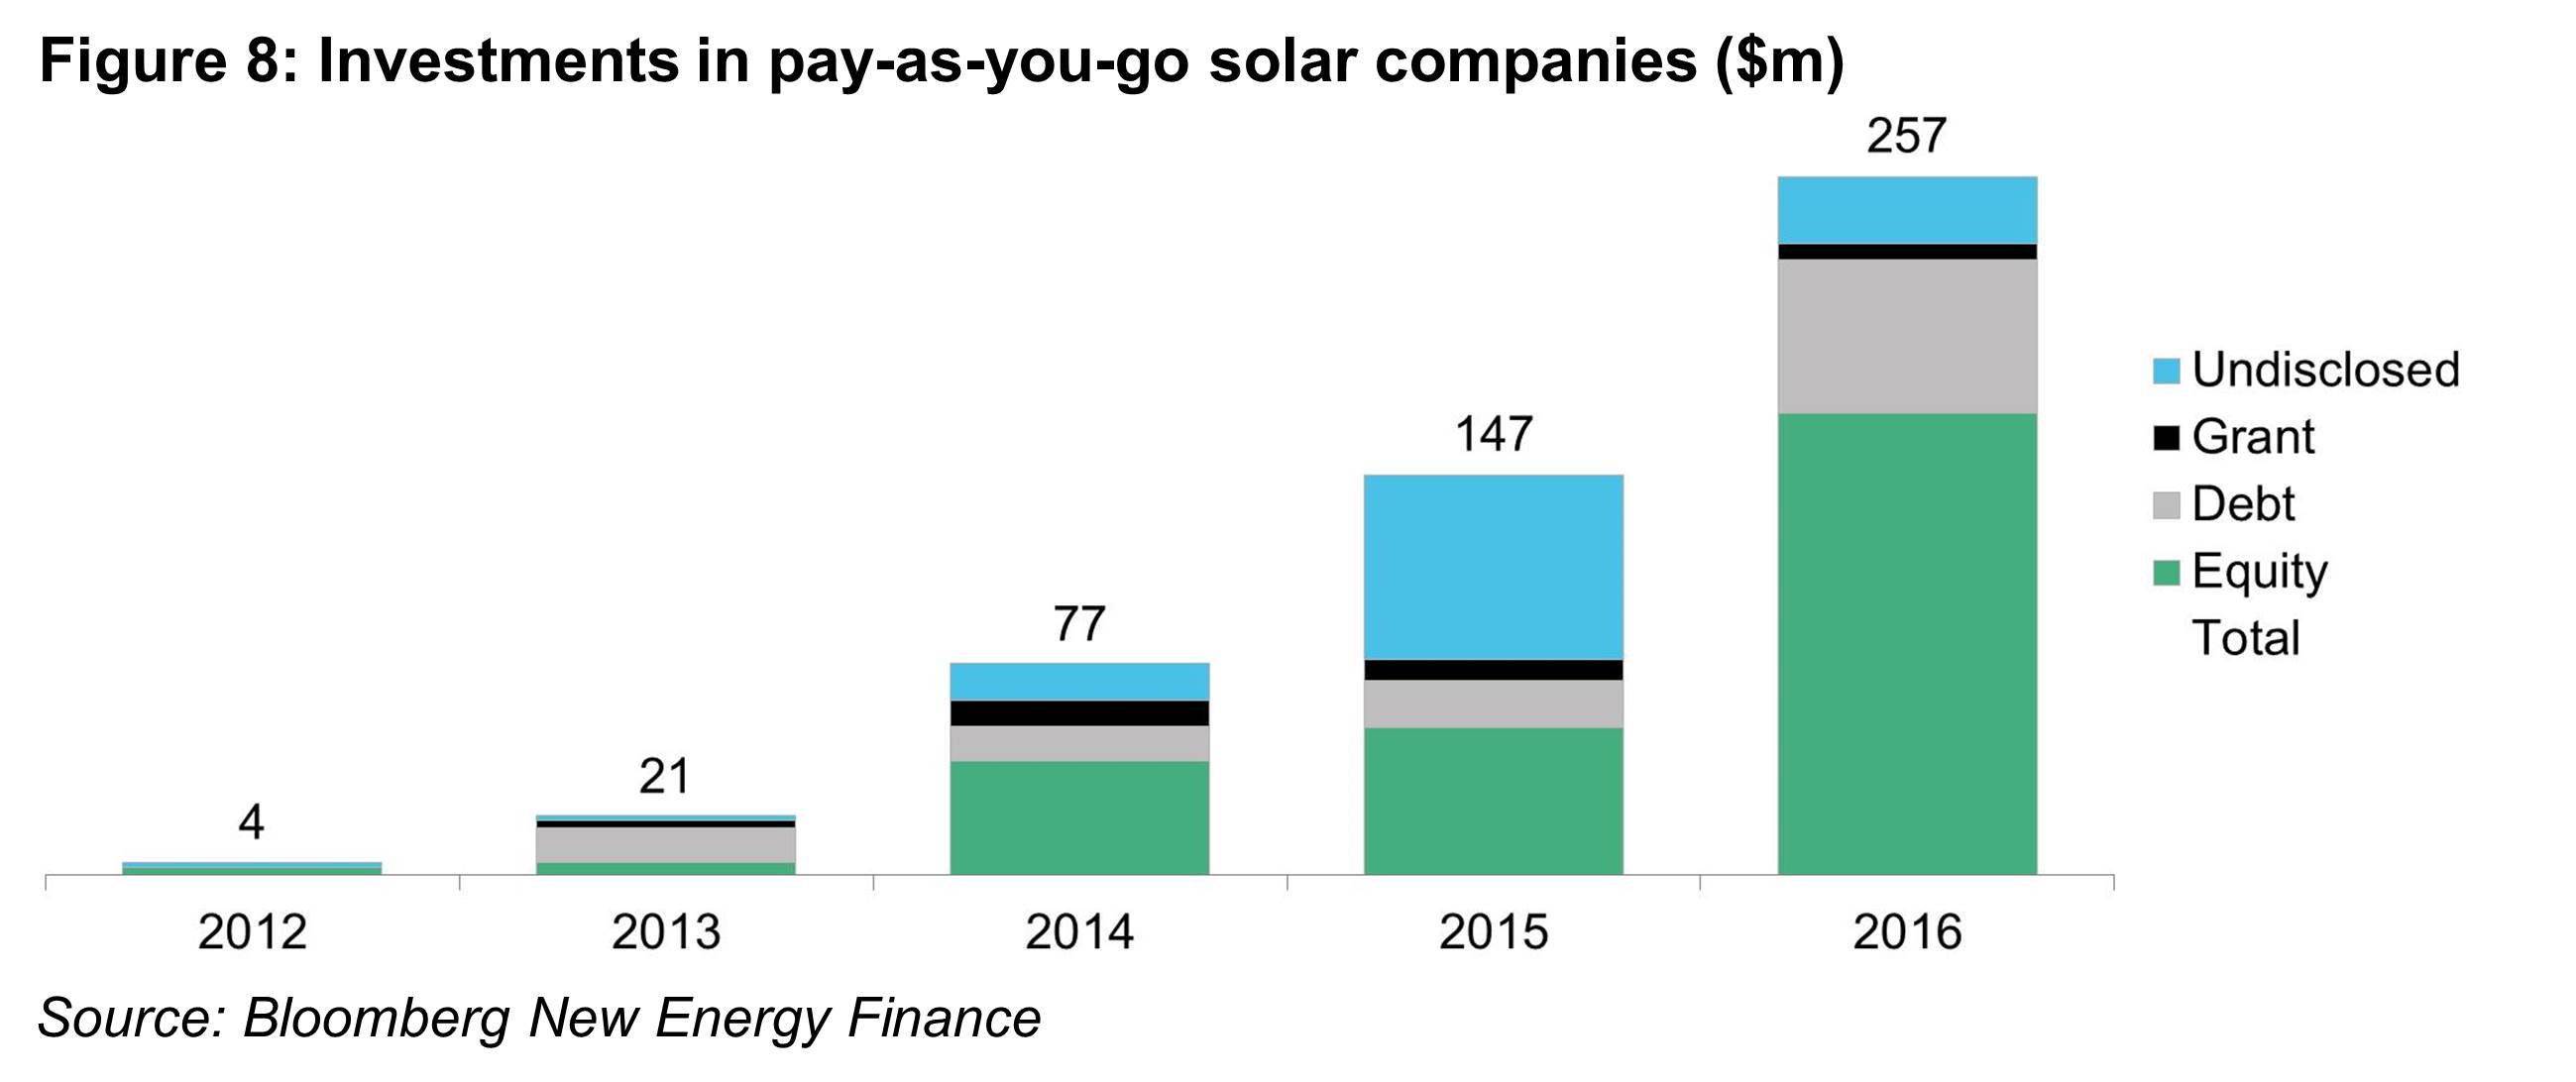 OG - Fig8 - Investments in pay-as-you-go solar companies